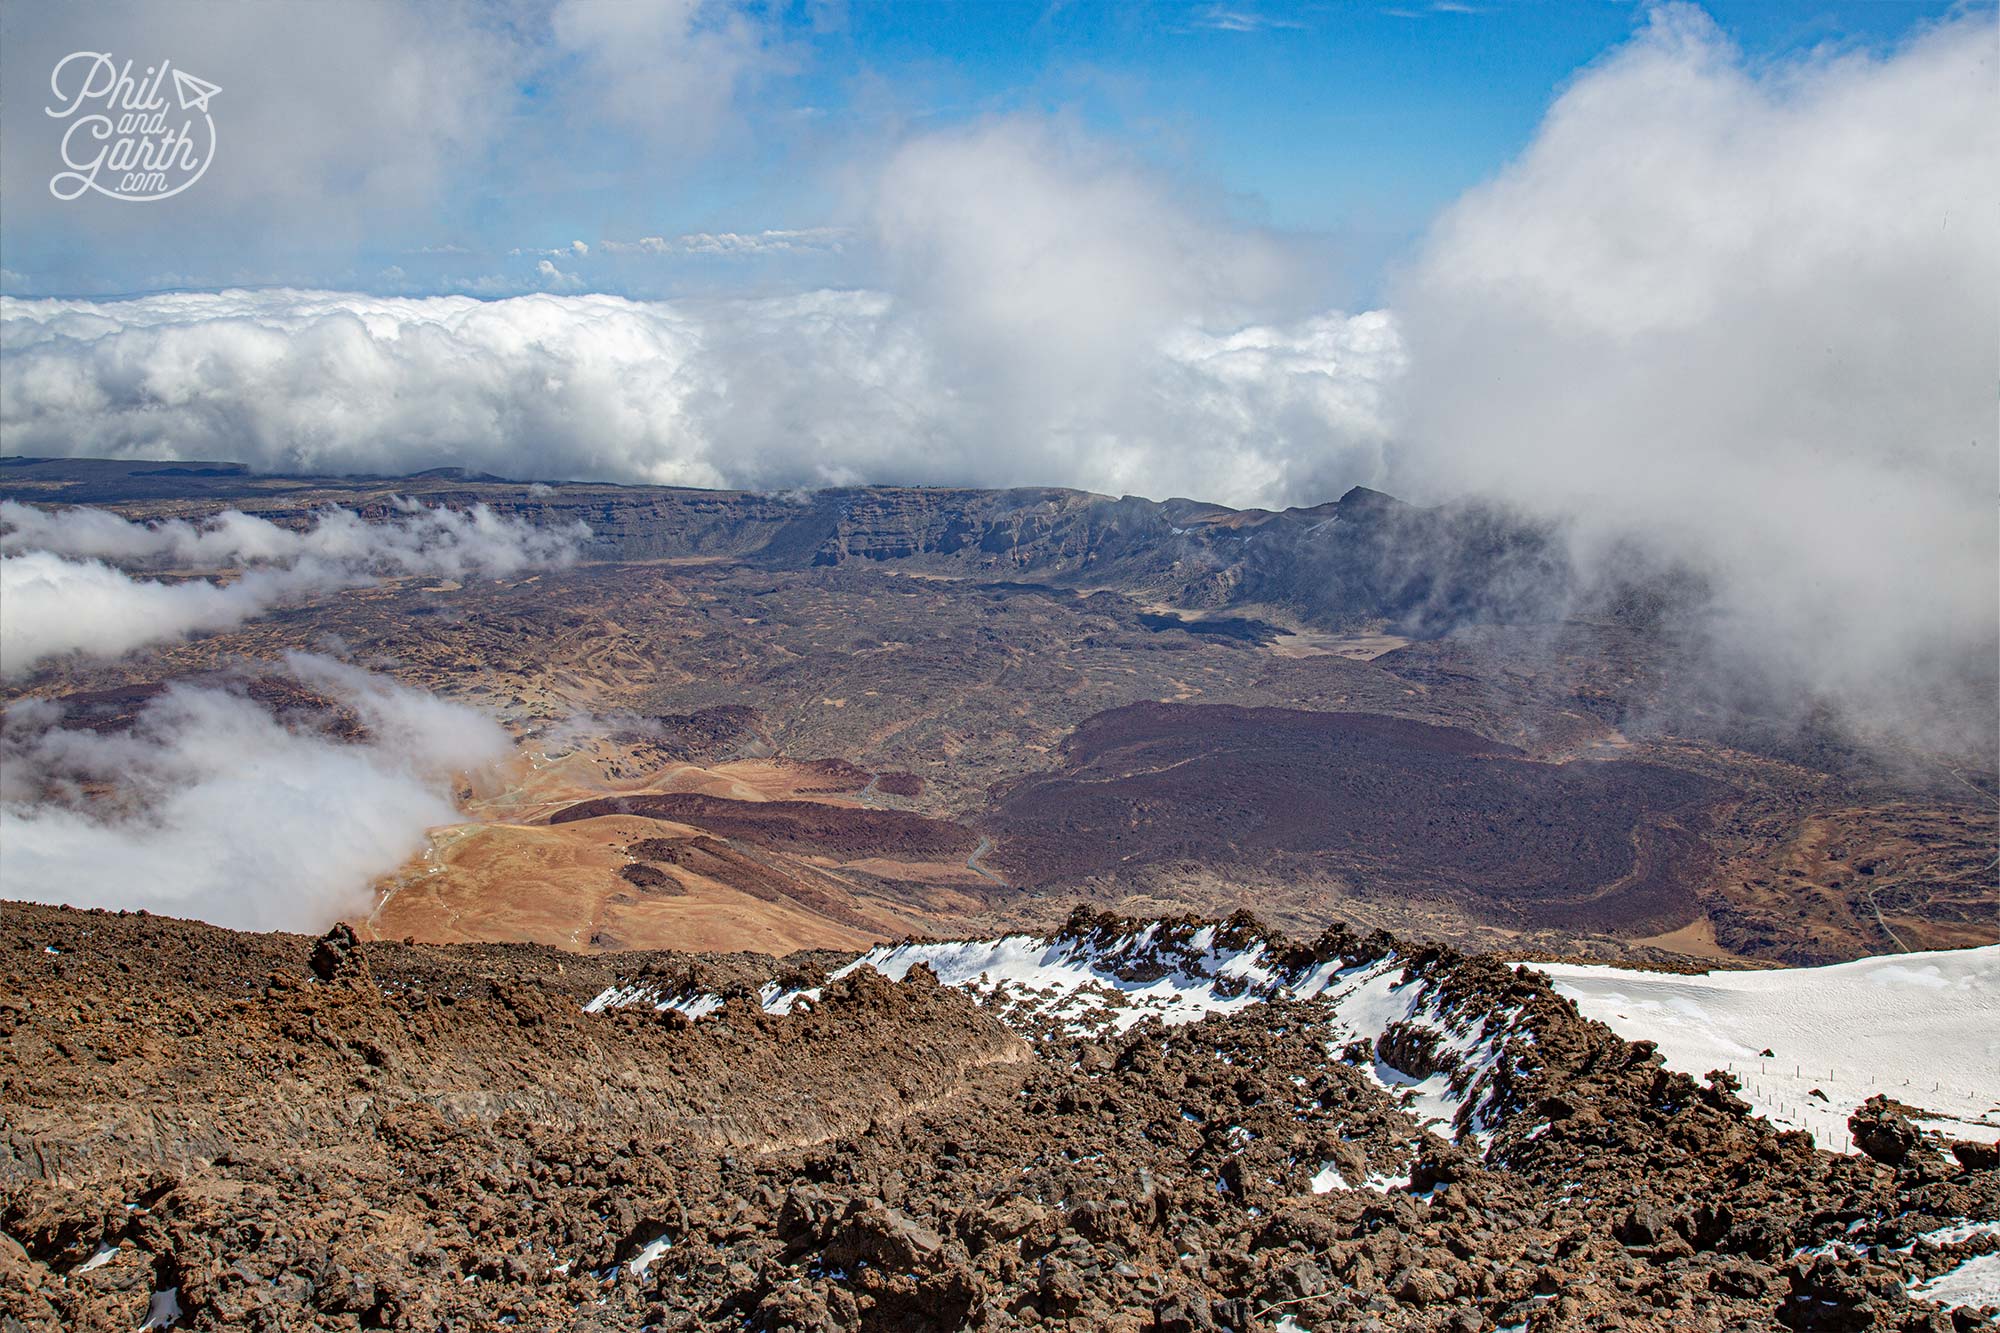 Breathtaking views from the top of the El Teide volcano